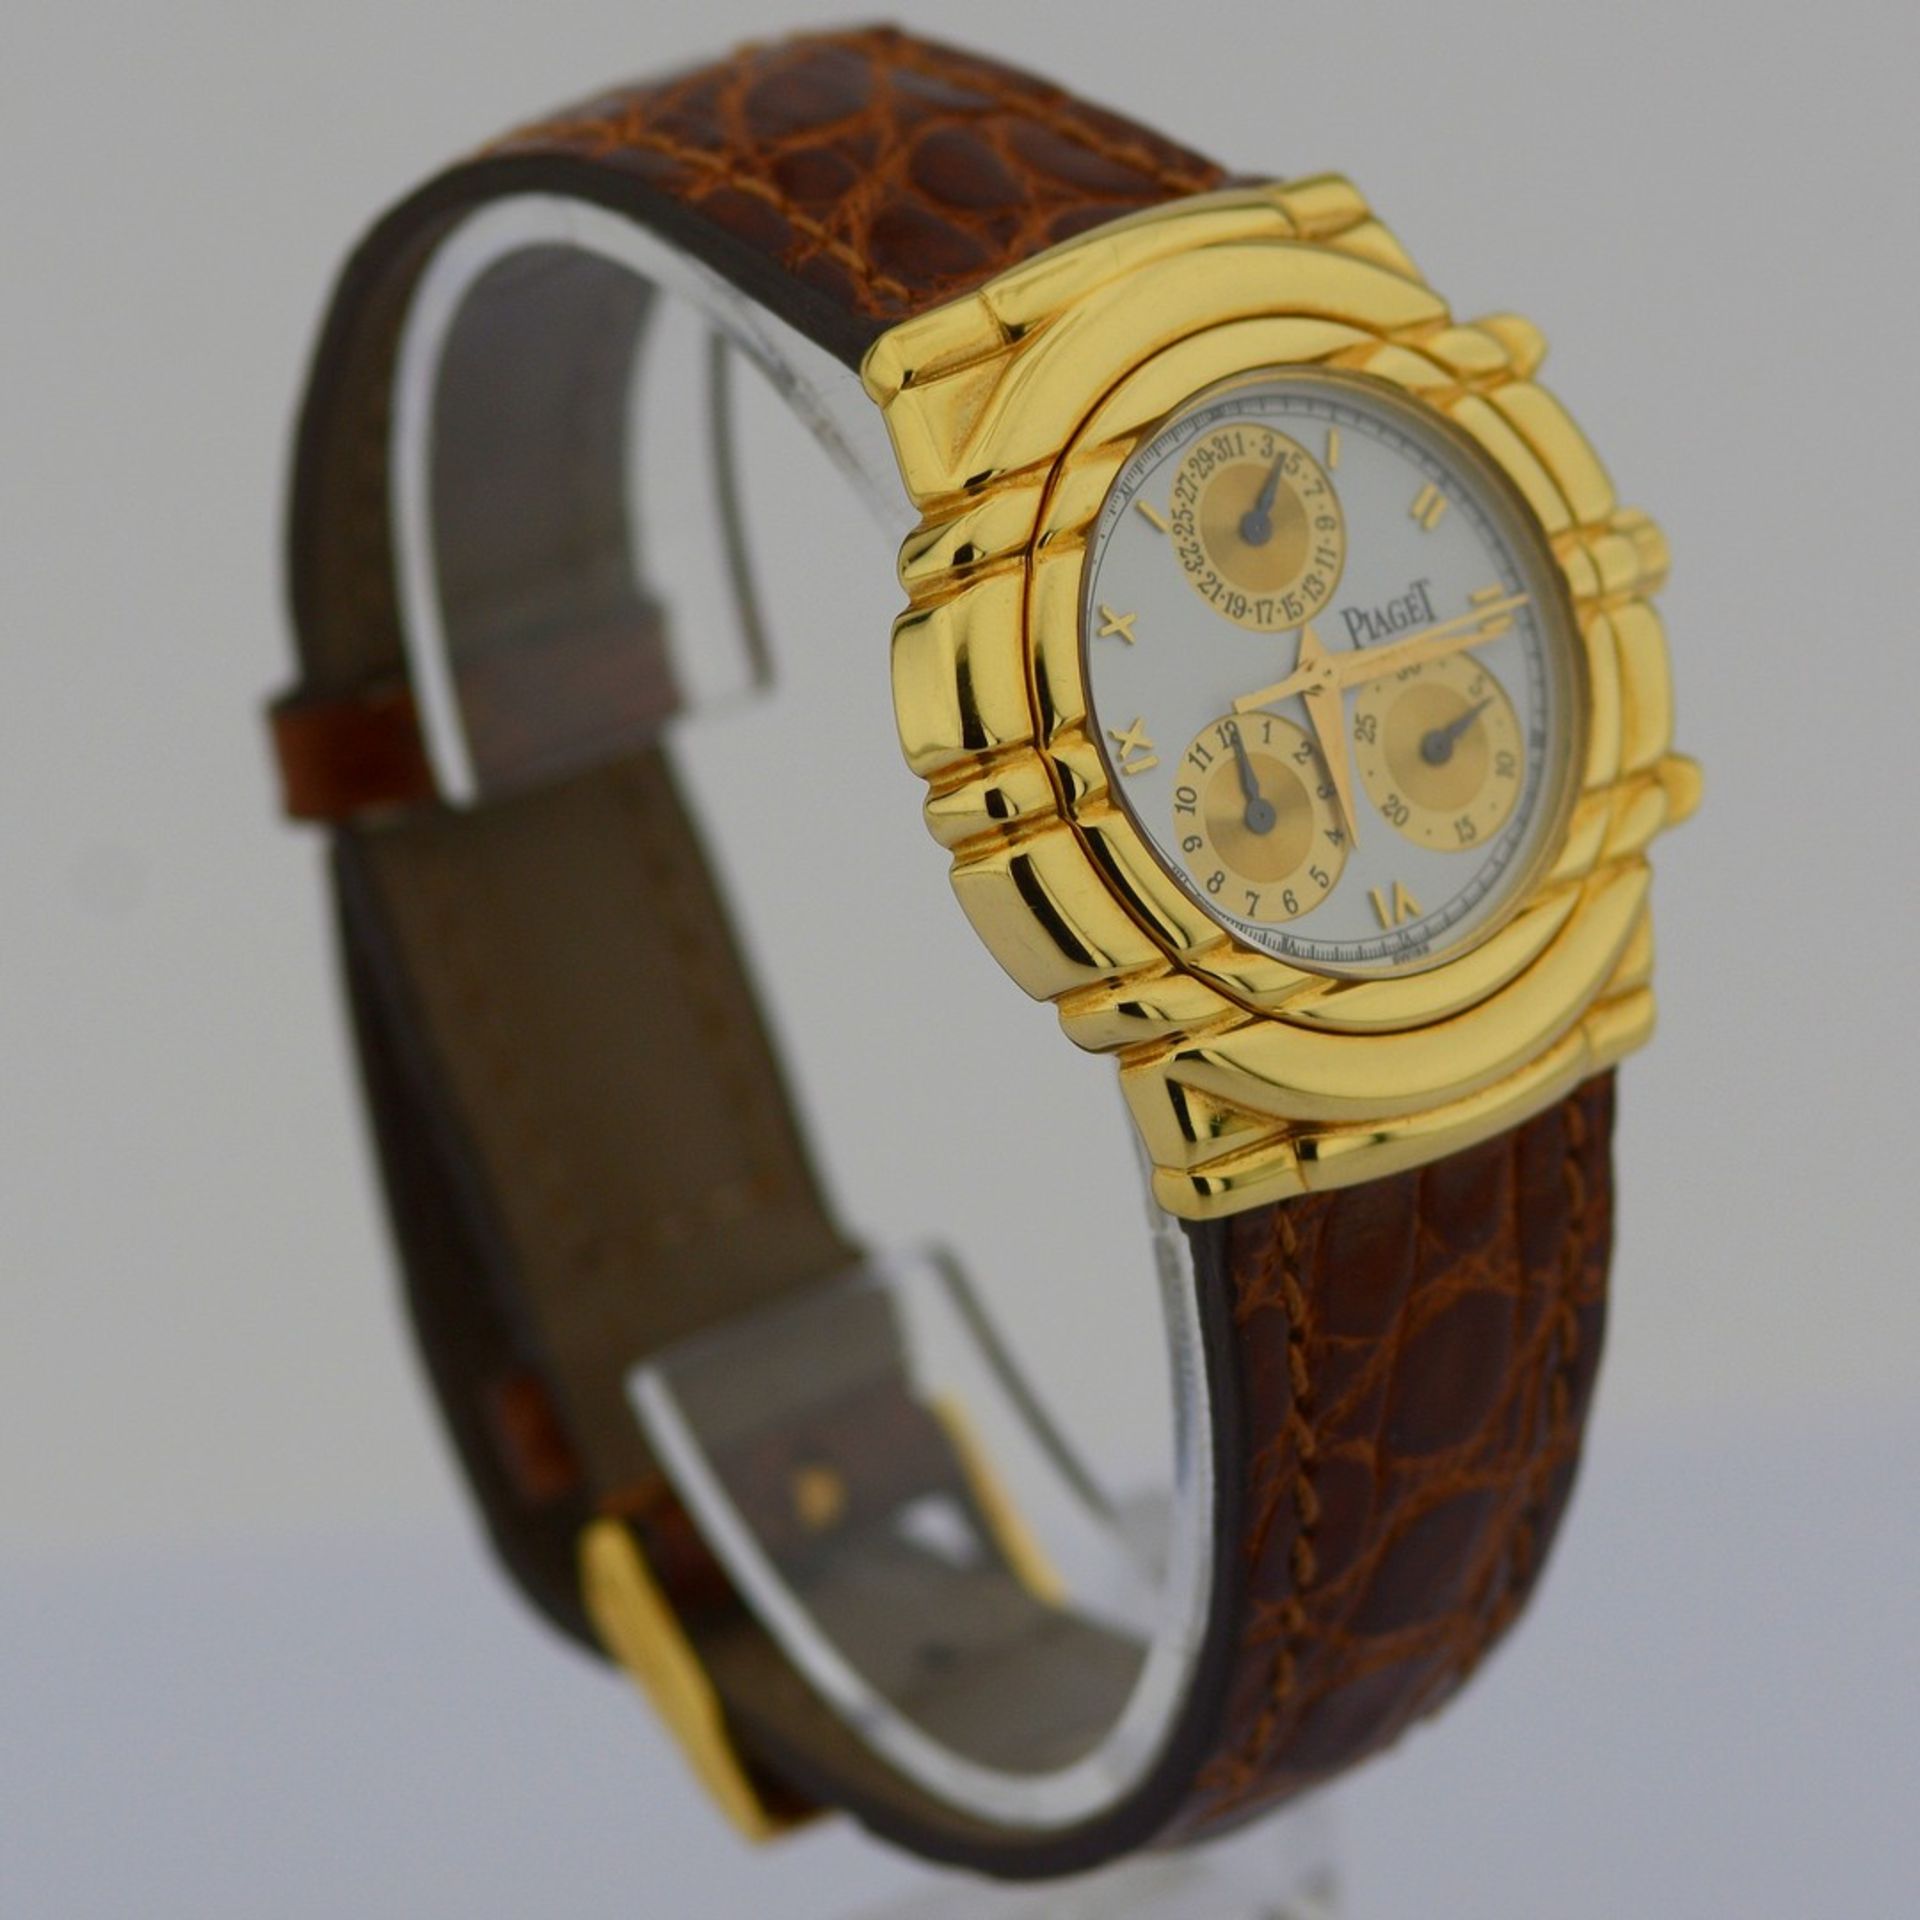 Piaget / Tanagra Chronograph - Lady's Yellow Gold Wristwatch - Image 9 of 15